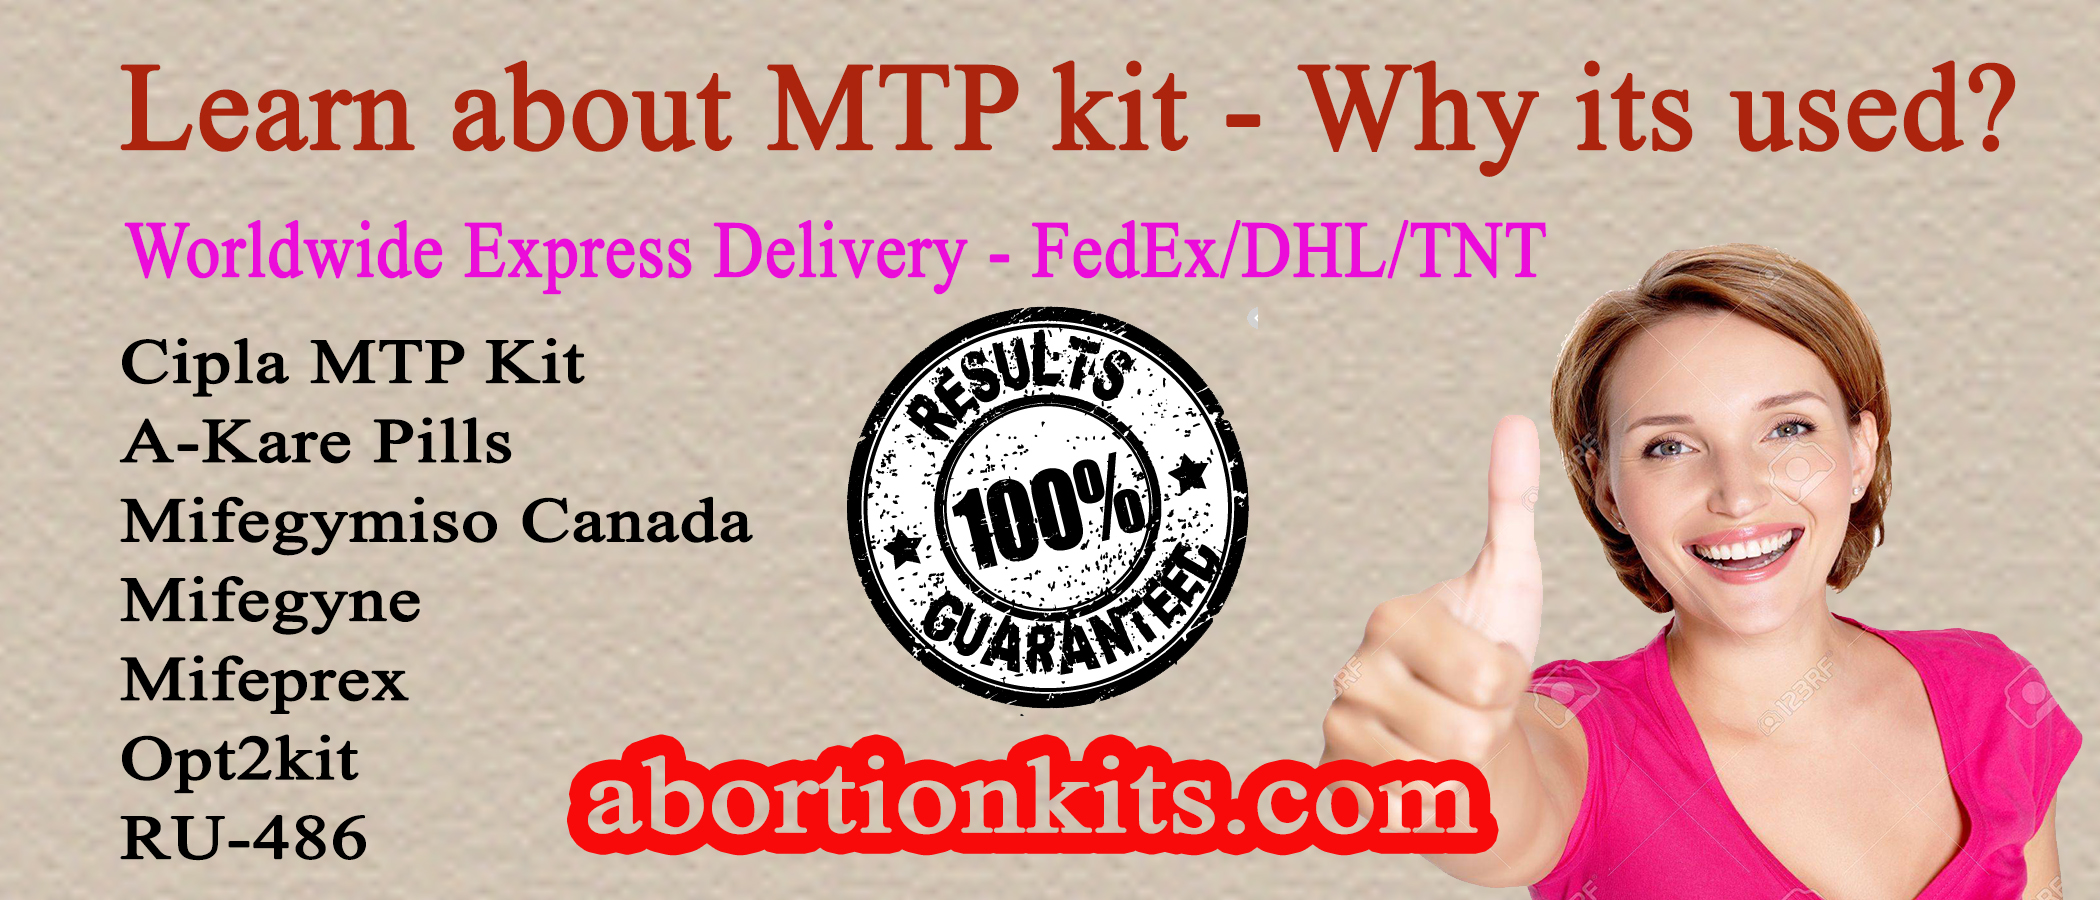 what is mtp kit